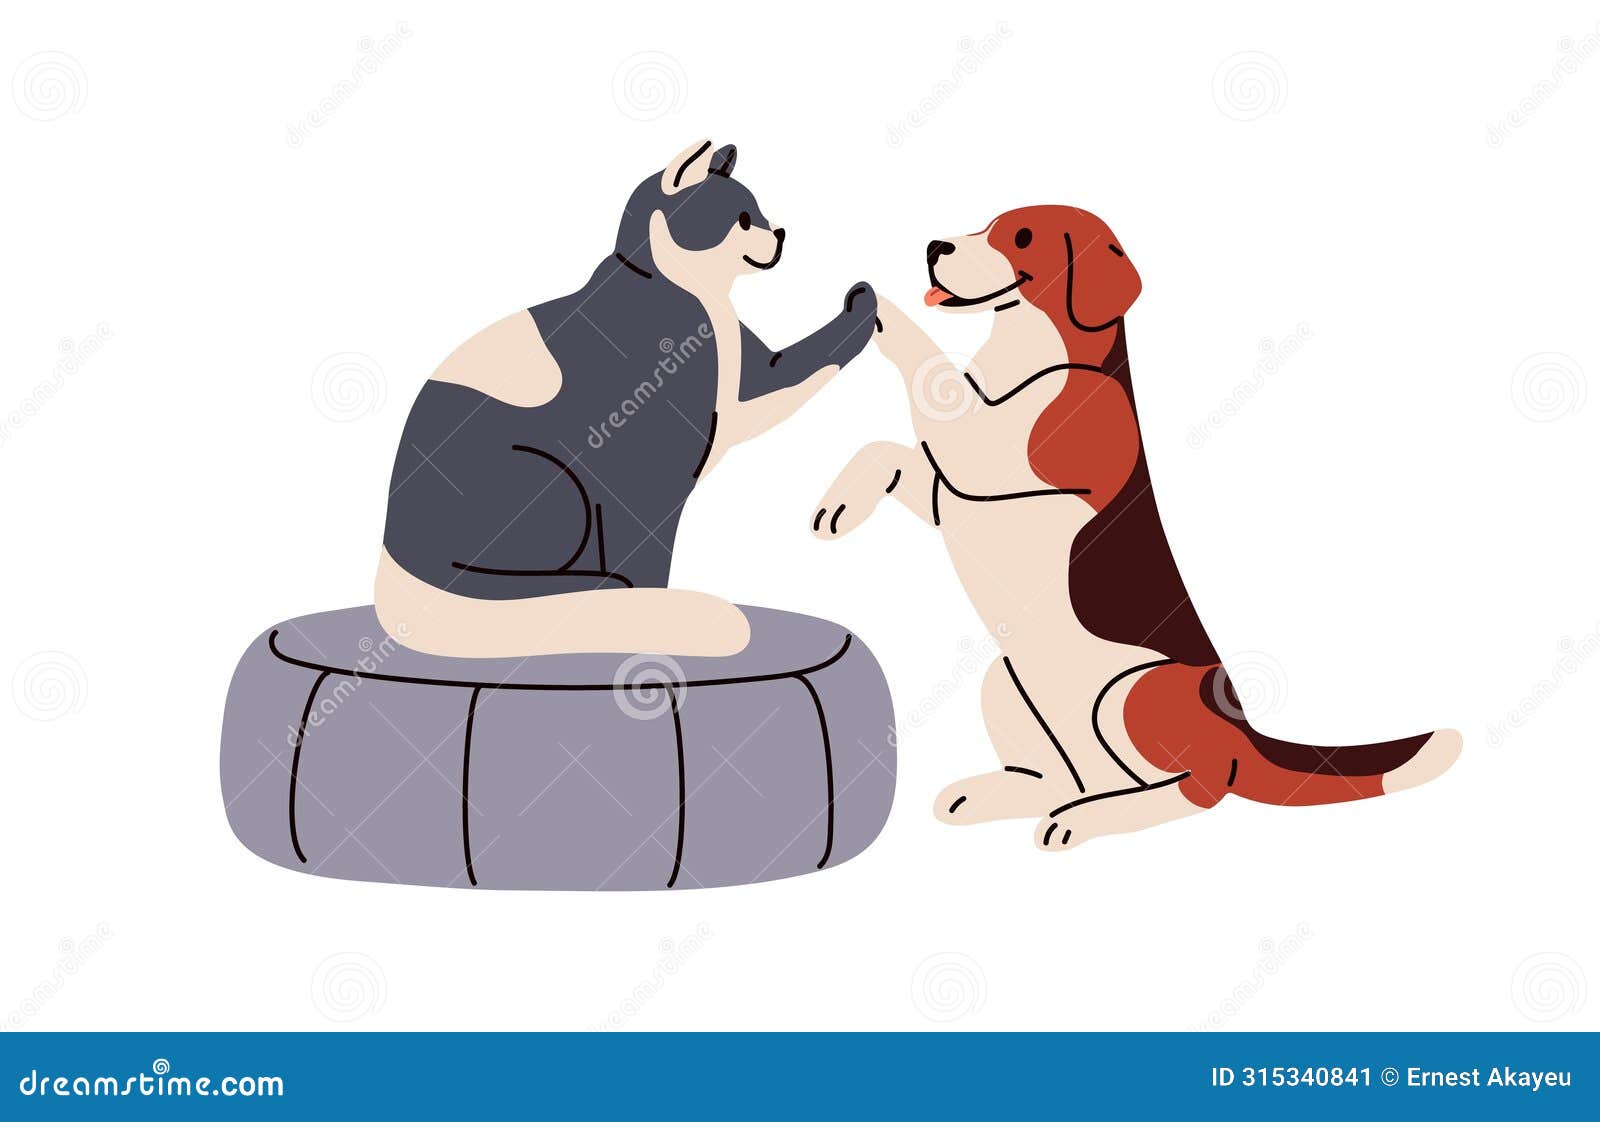 cute dog and cat friends giving high five. pets communication concept. smart canine and feline animals greeting with paw